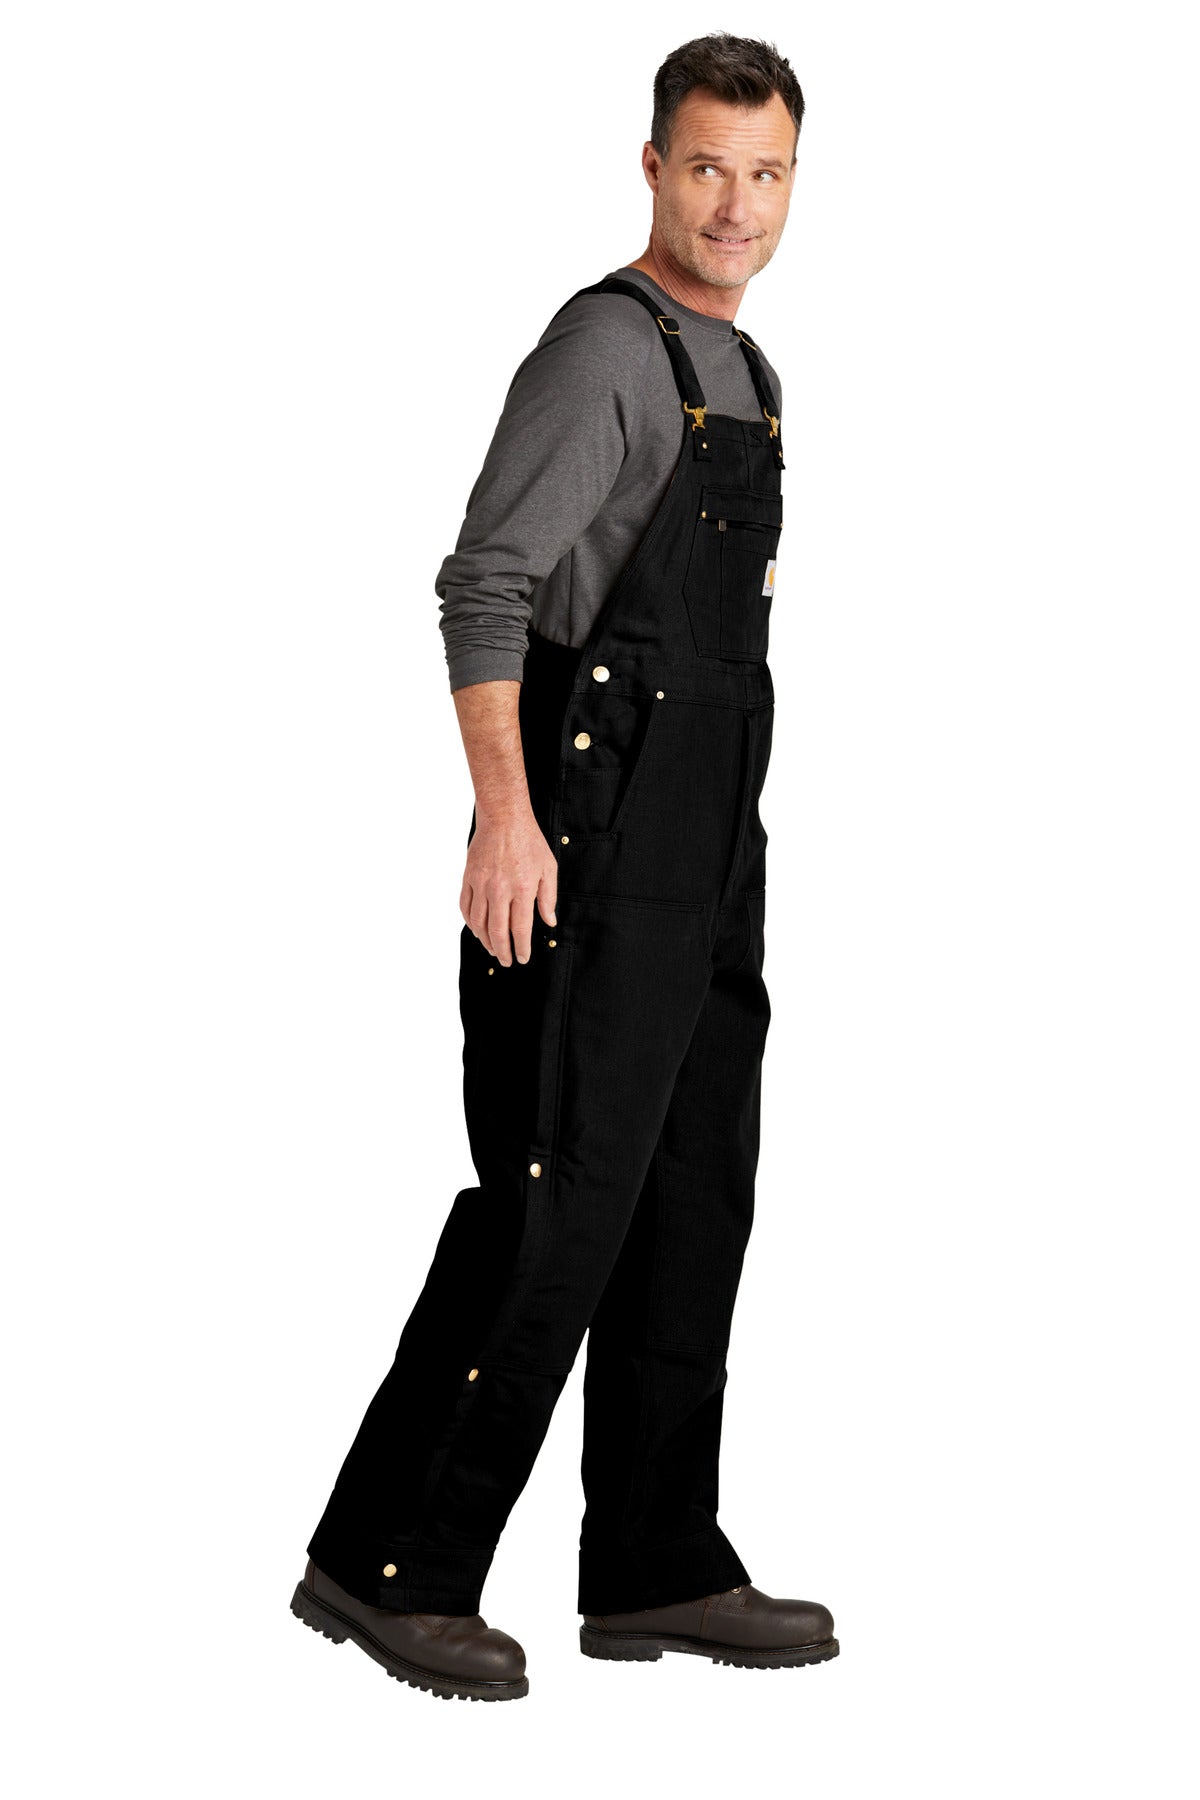 Carhartt Men's Loose Fit Firm Duck Insulated Bib Overall in Carhartt Brown